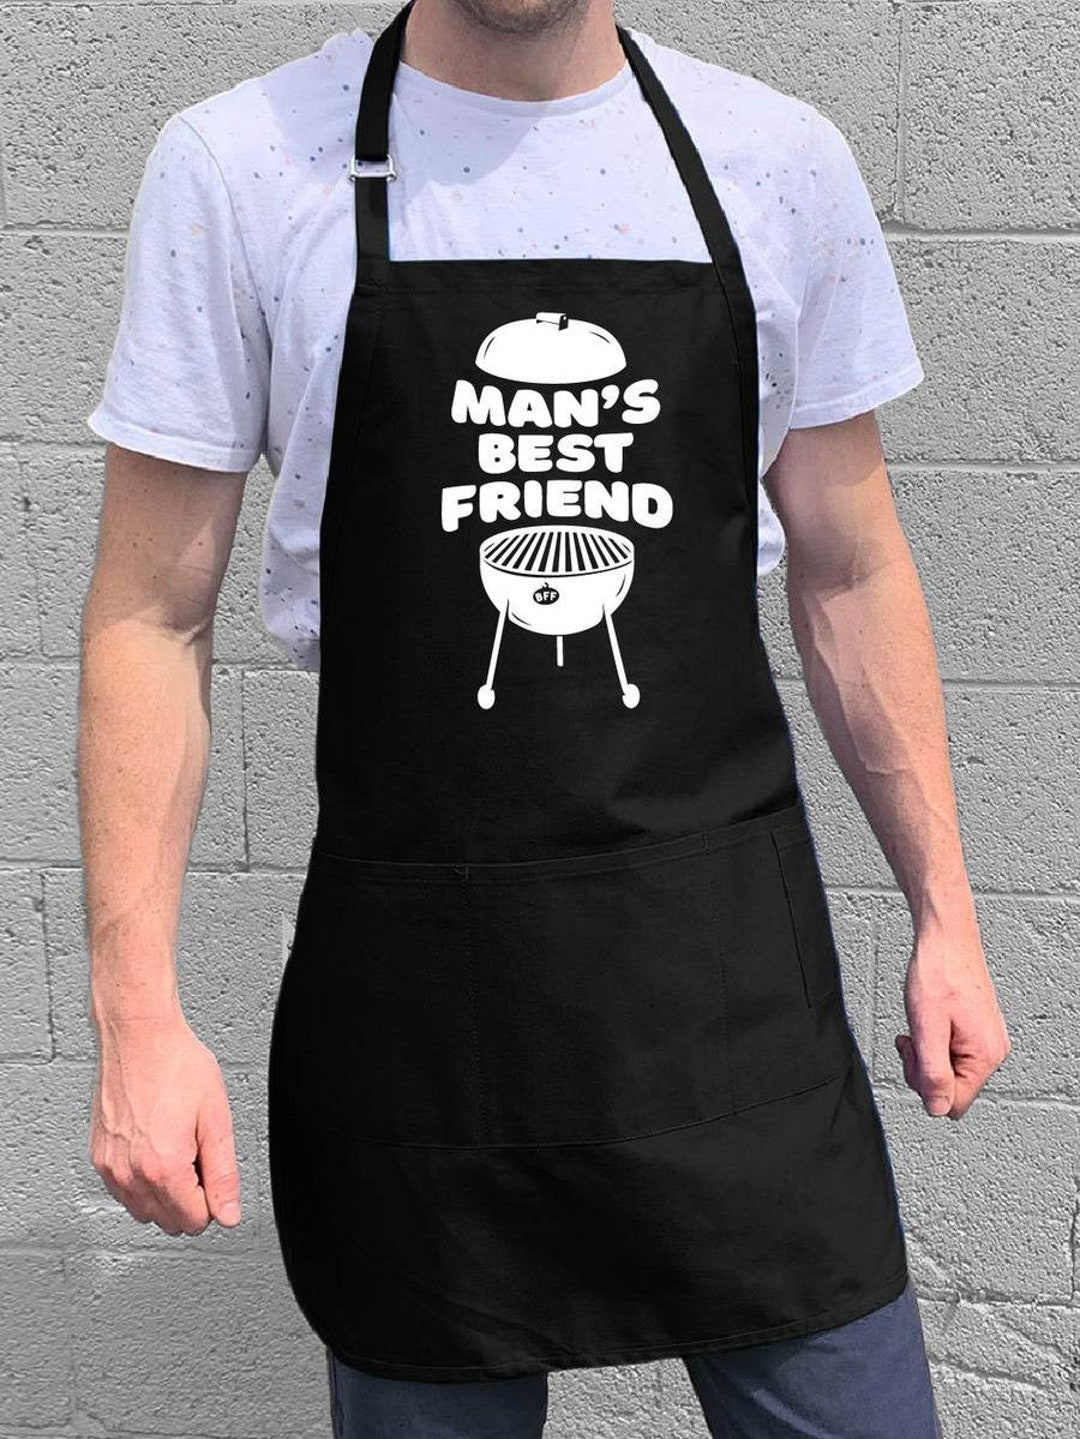  HBESTIE Unique Aprons for Men, Women, Christmas Gifts for Men,  Dad Gifts from Daughter Son, BBQ Kitchen Aprons Gifts for Husband,  Boyfriend, Coolest Cooking Gifts, Grilling BBQ Gifts for Men: Home